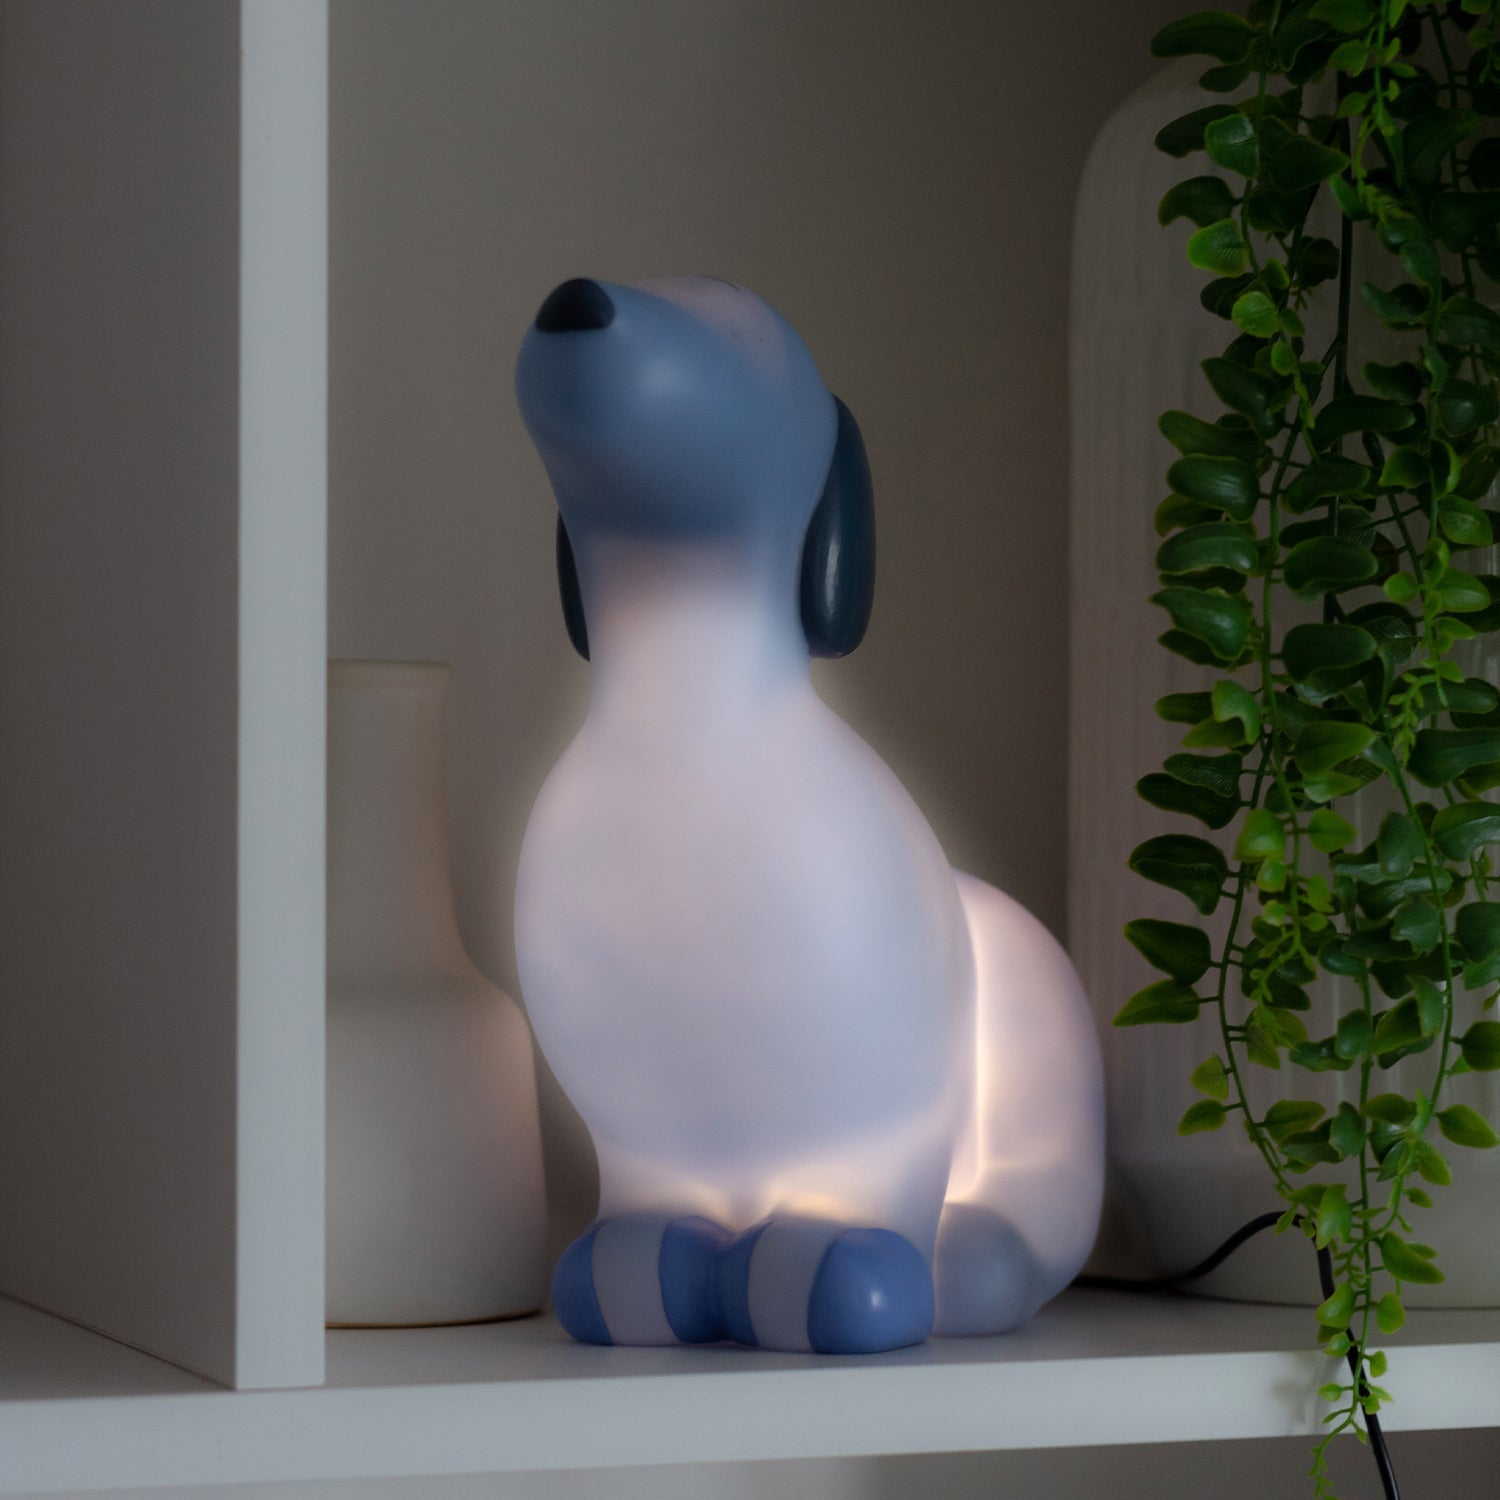 Standing Dog-shaped blue night light. These newest Night Lights are set to be an incredible décor addition to any little ones' room and an amazing gift idea for all occasions - birthdays, christenings, holidays, and just because! Boasting a collection of creatures that are sure to both delight and soothe kids of all ages, Night Lights come with custom packaging that features a fun poem and are powered by a USB cord to ensure the Night Light stays bright. 